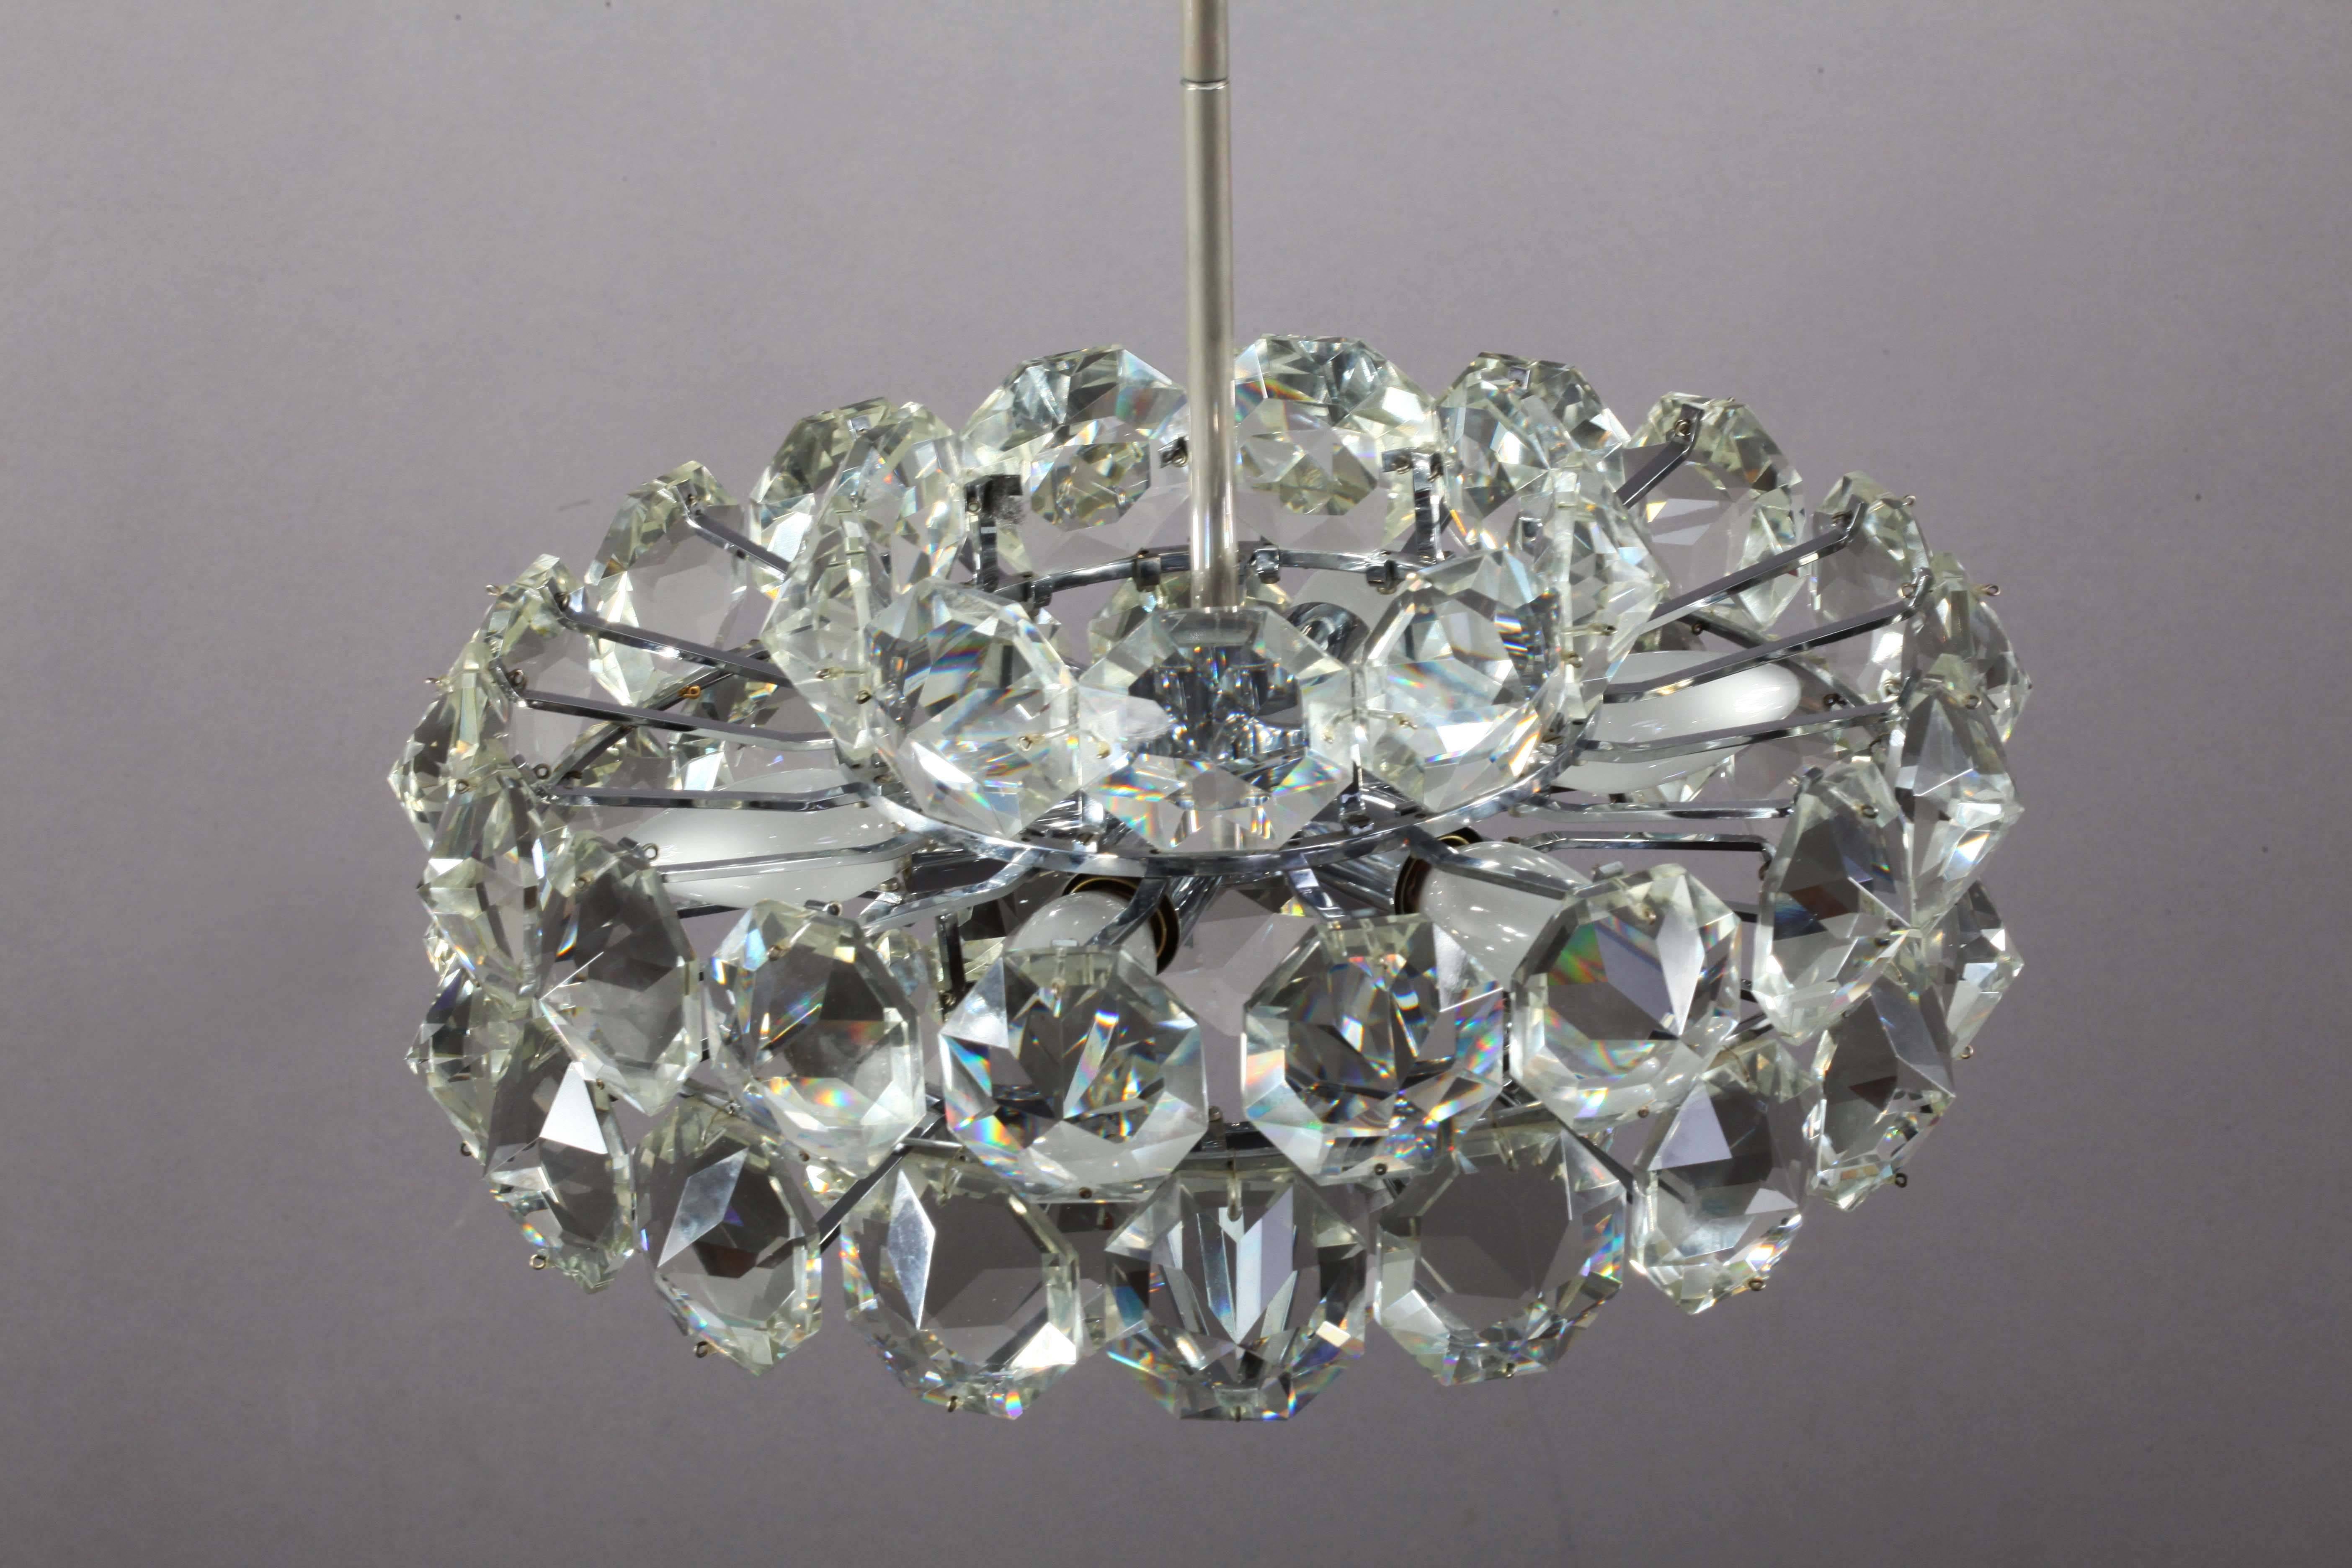 Gorgeous chandelier by Bakalowits & Sohne featuring a multitude of very uniquely sized large (each 6.5 x 6.5 cm) and exquisite with big sparkling octagon gem-like crystals hanging from a nickeled brass frame. Six bulbs are illuminating this